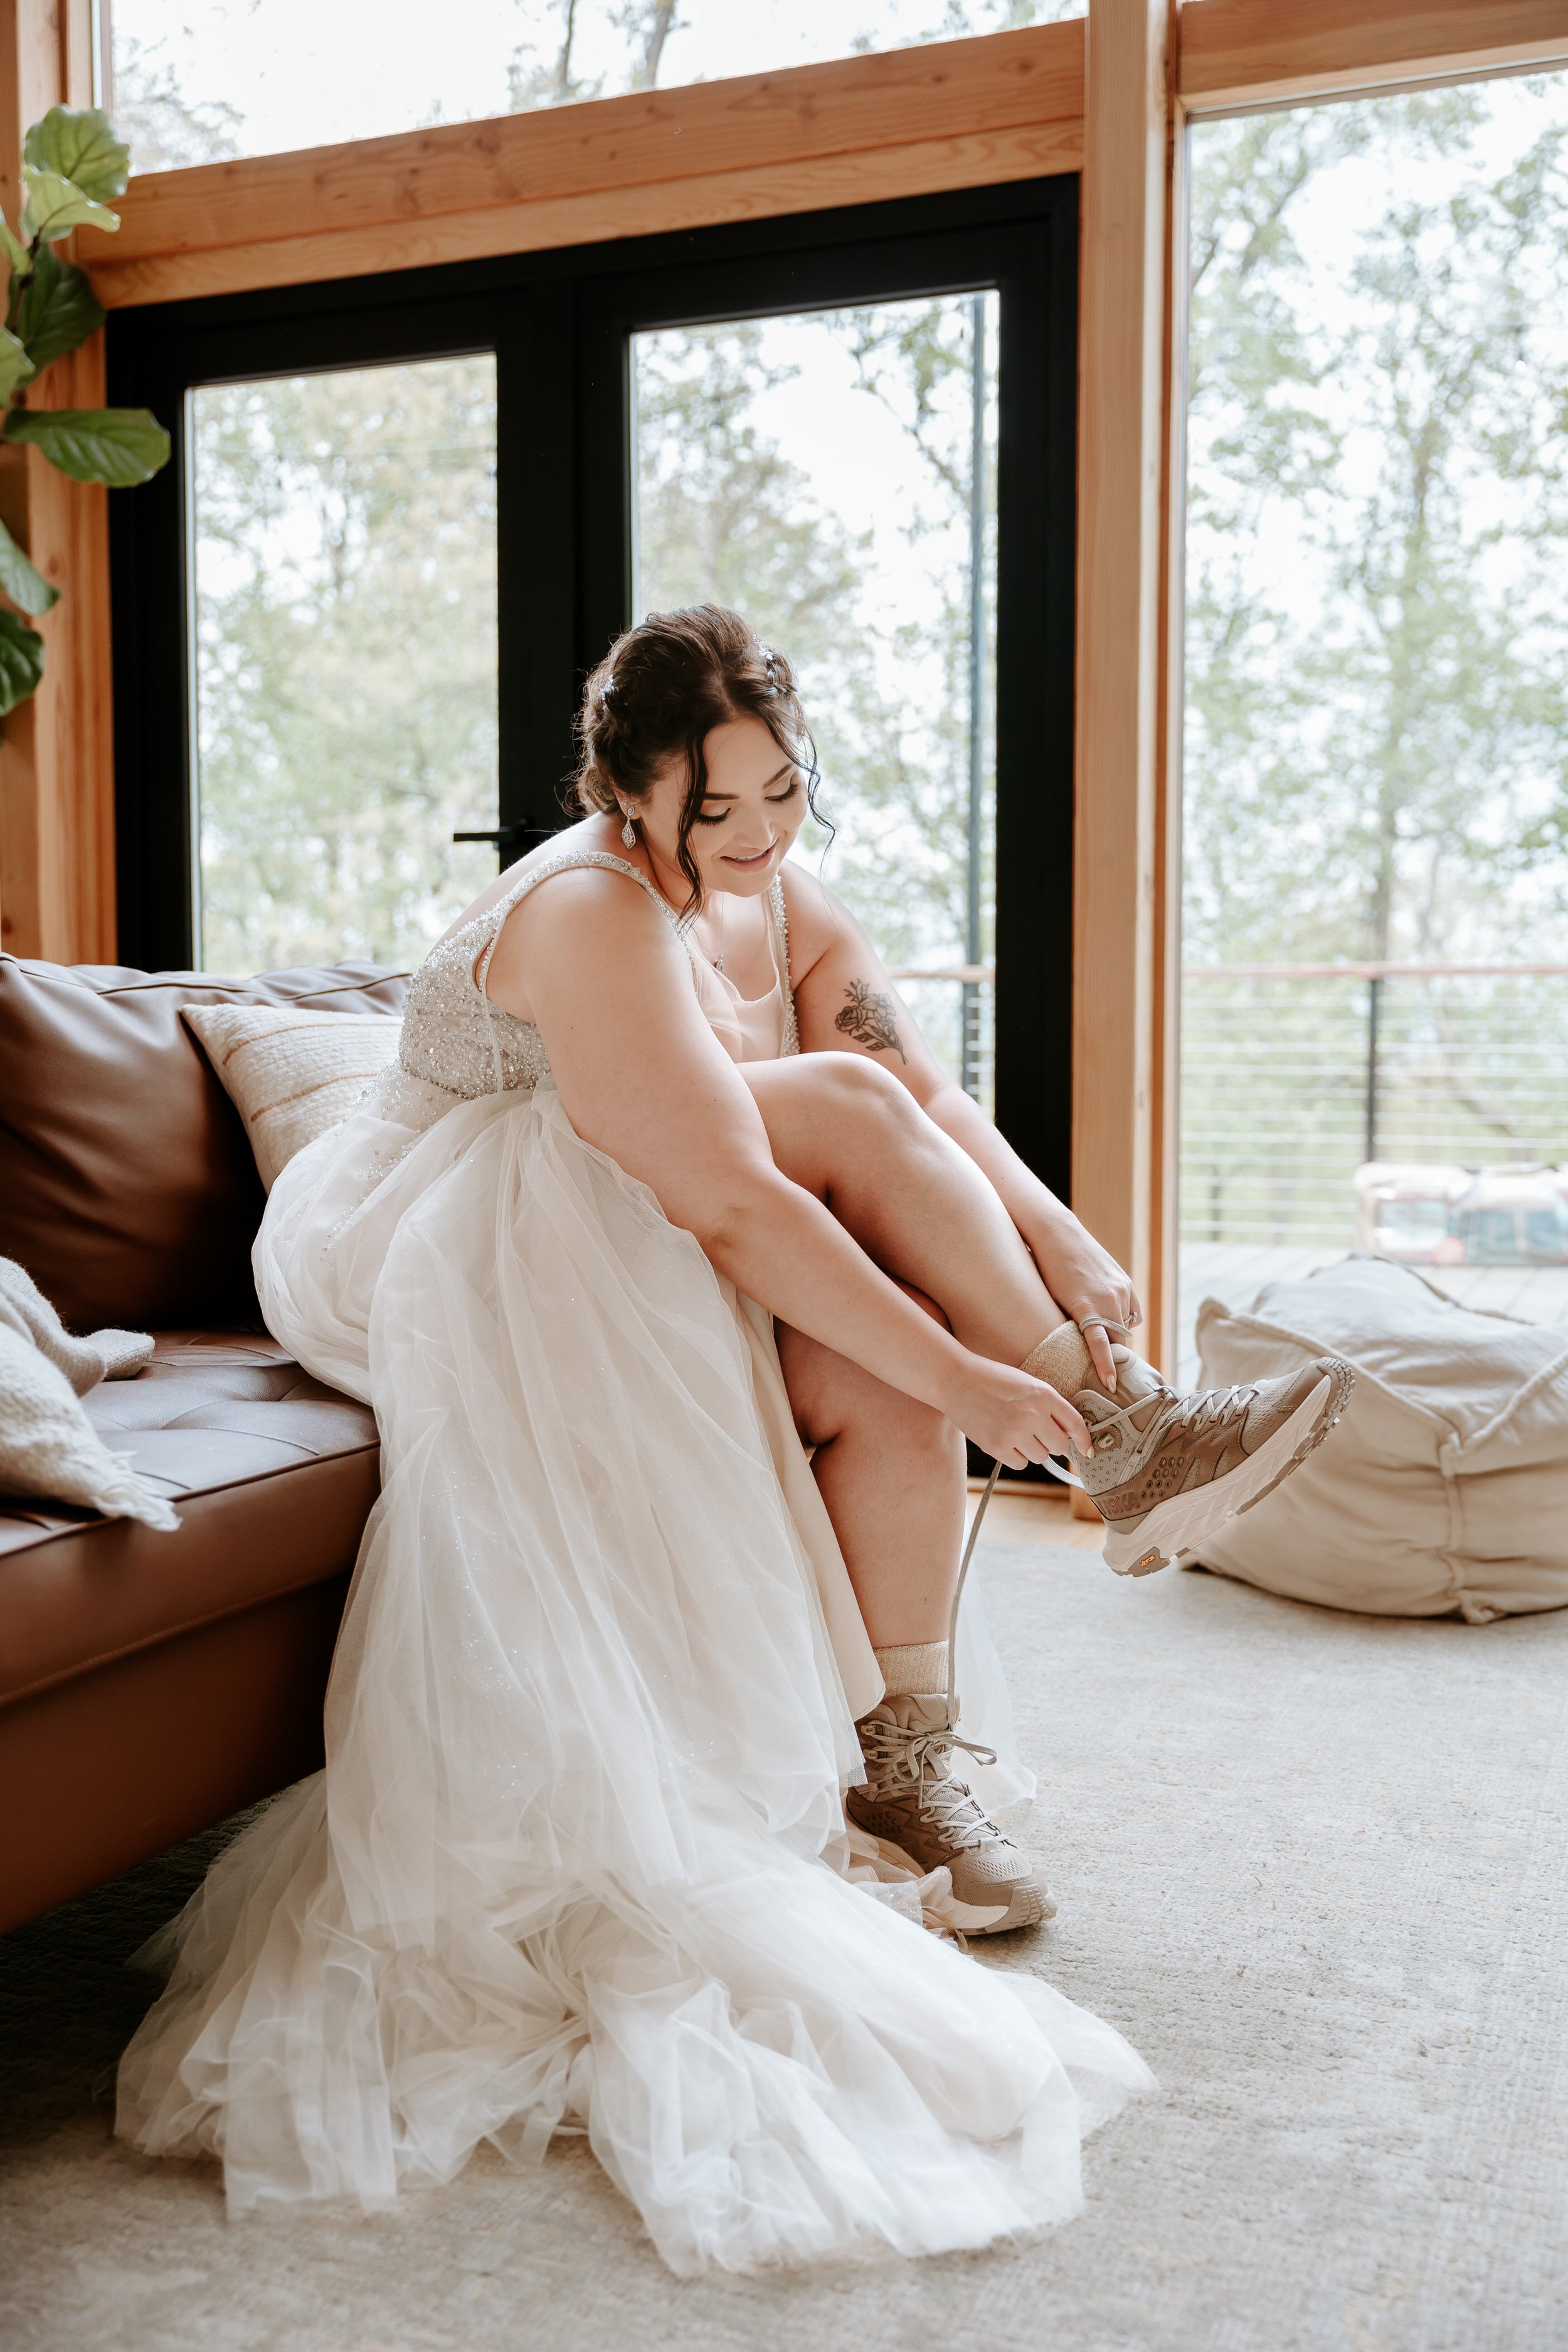 Bride puts on hiking boots.